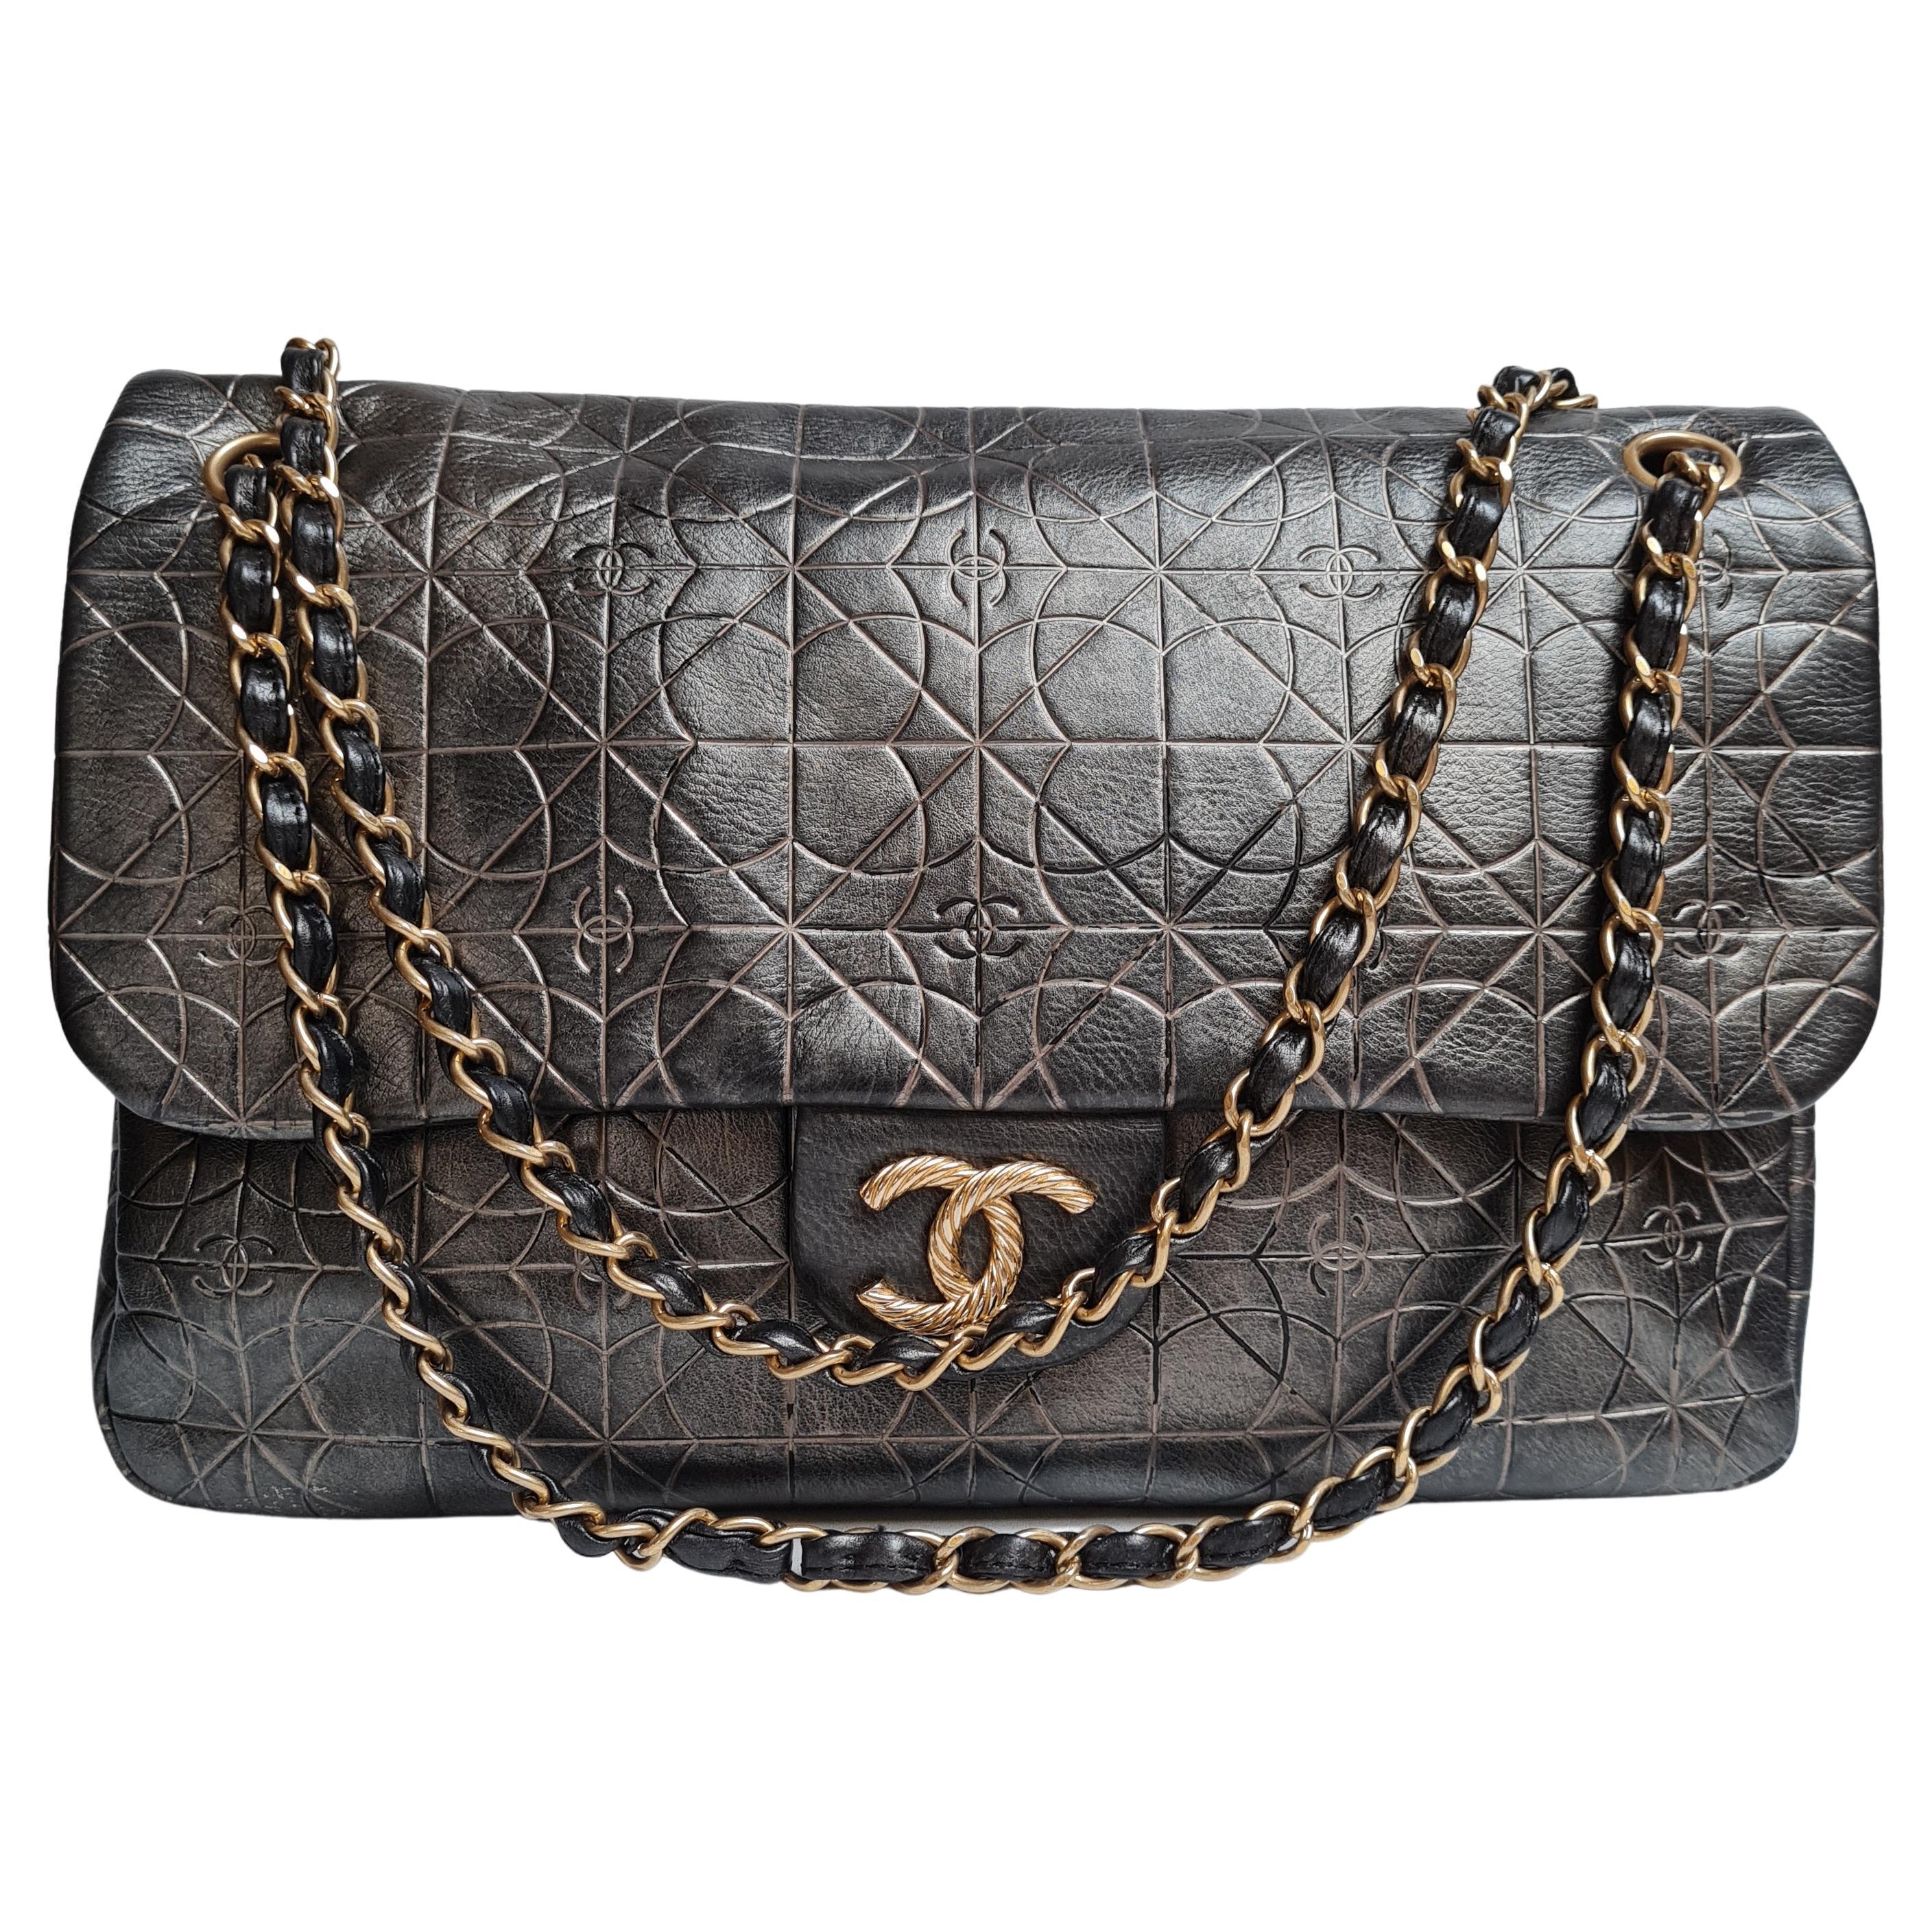 chanel kelly bag price